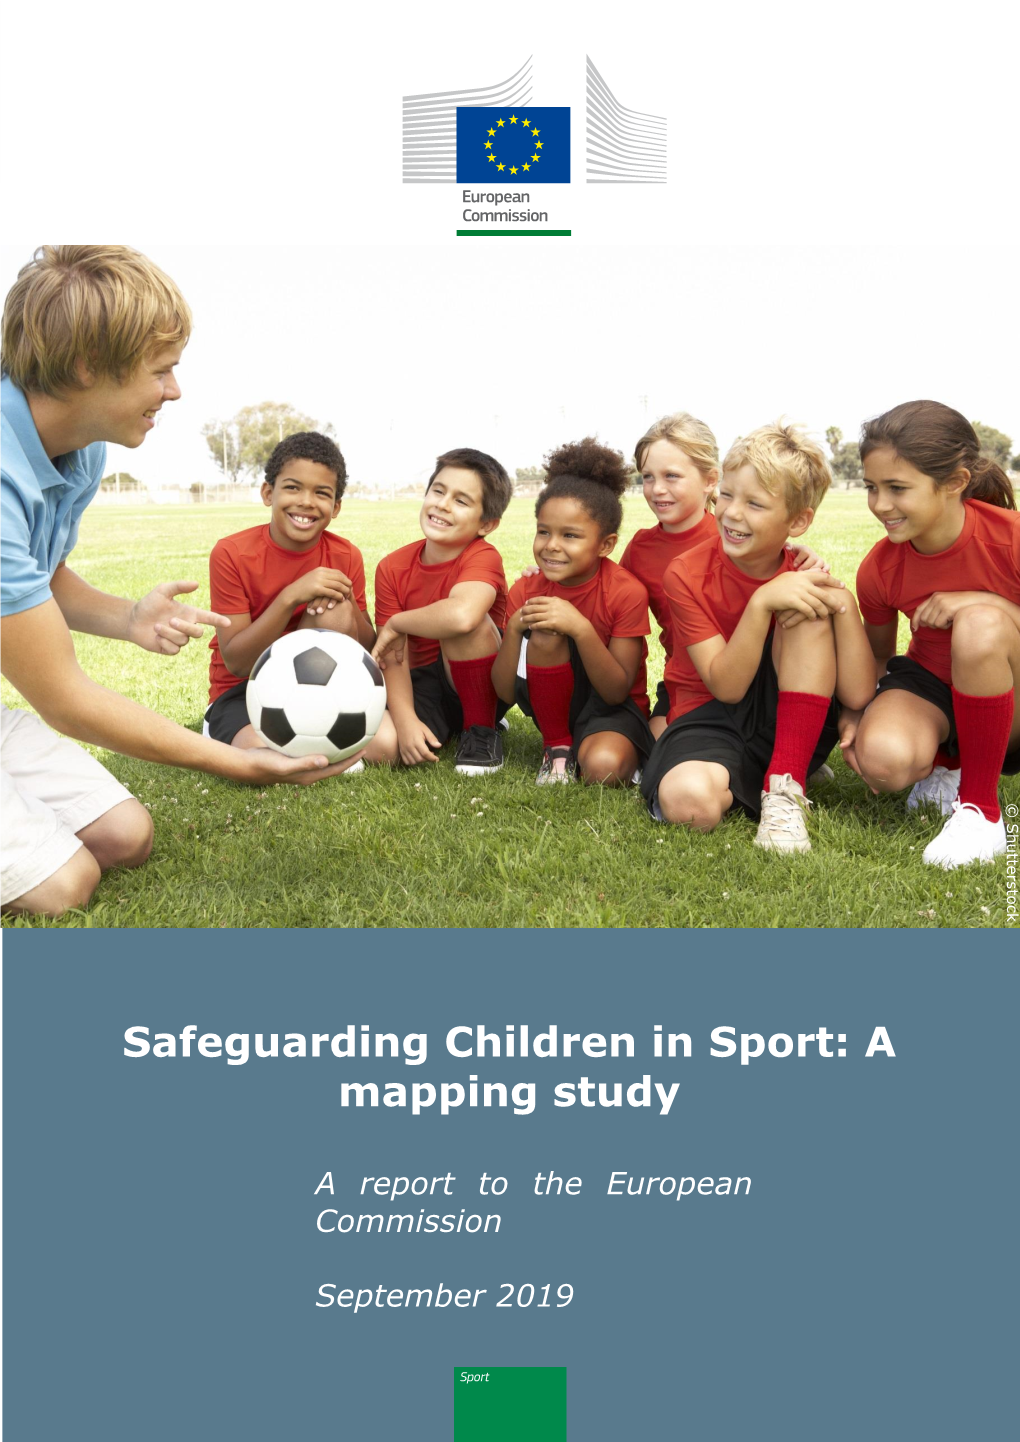 Safeguarding Children in Sport: a Mapping Study